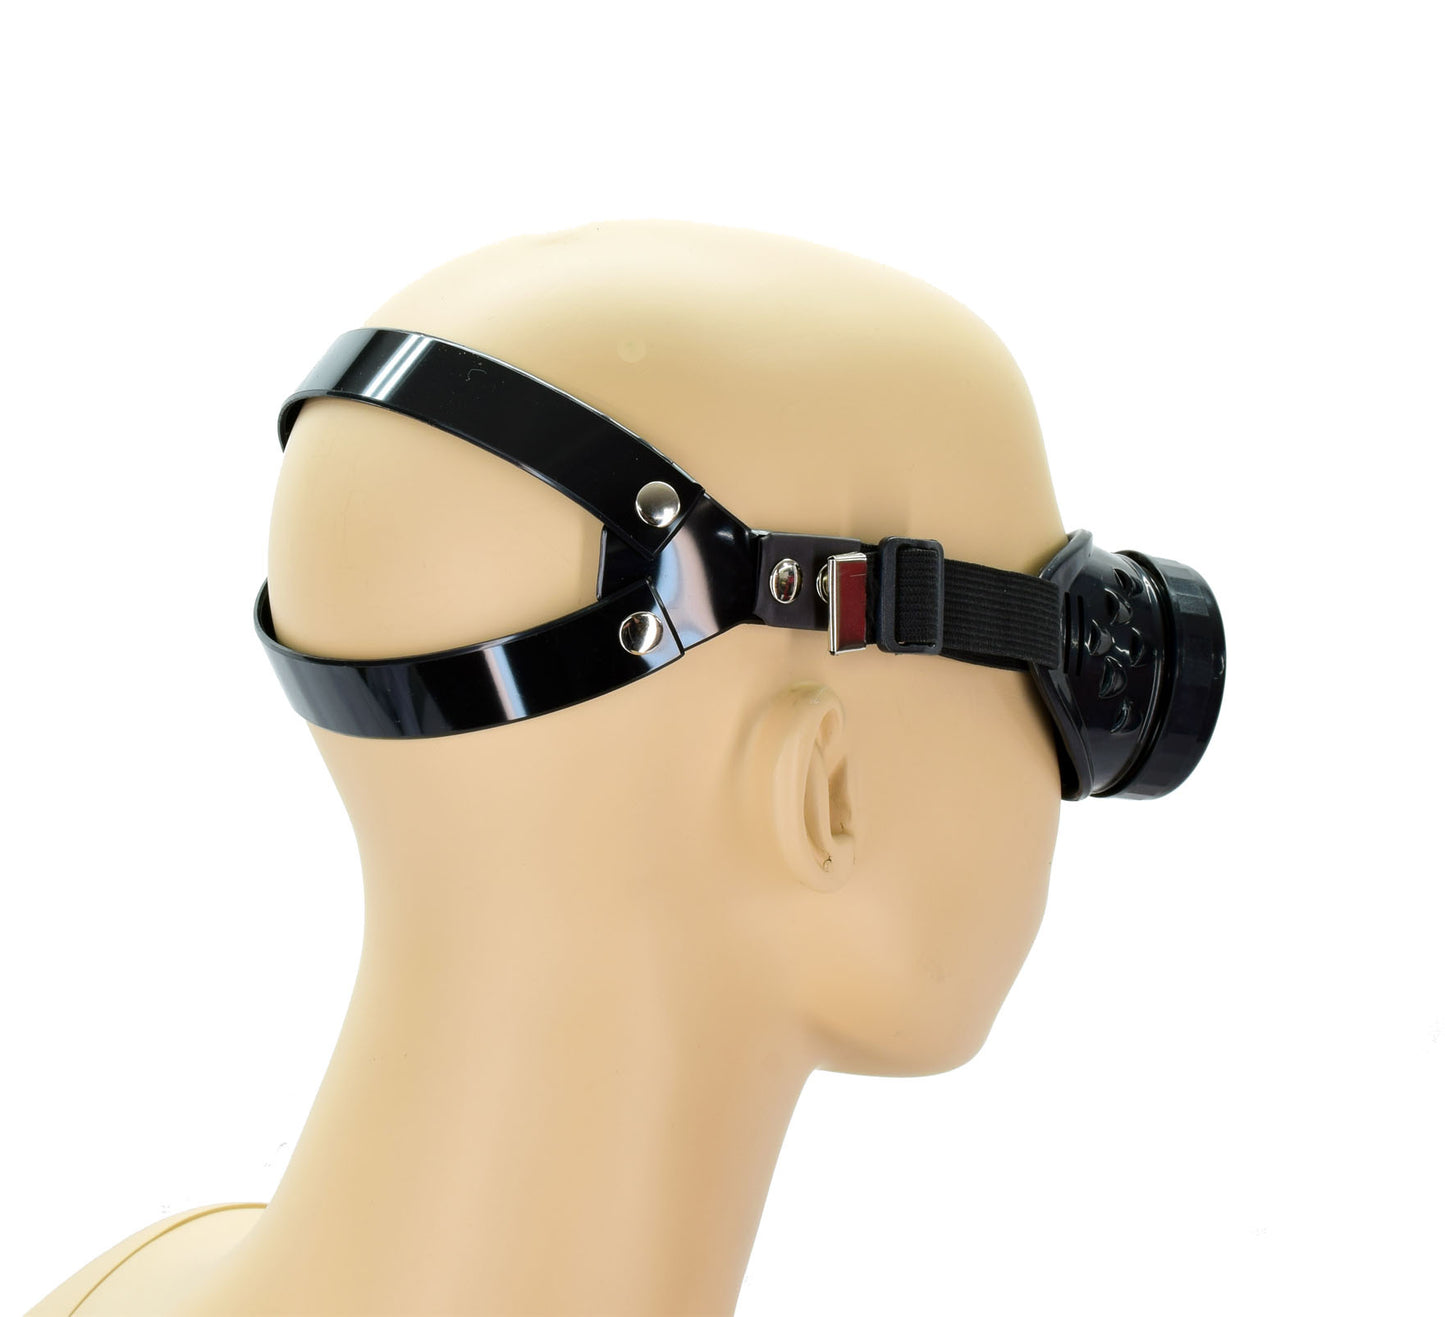 The right side and rear view of the Blind Goggles on a mannequin head.